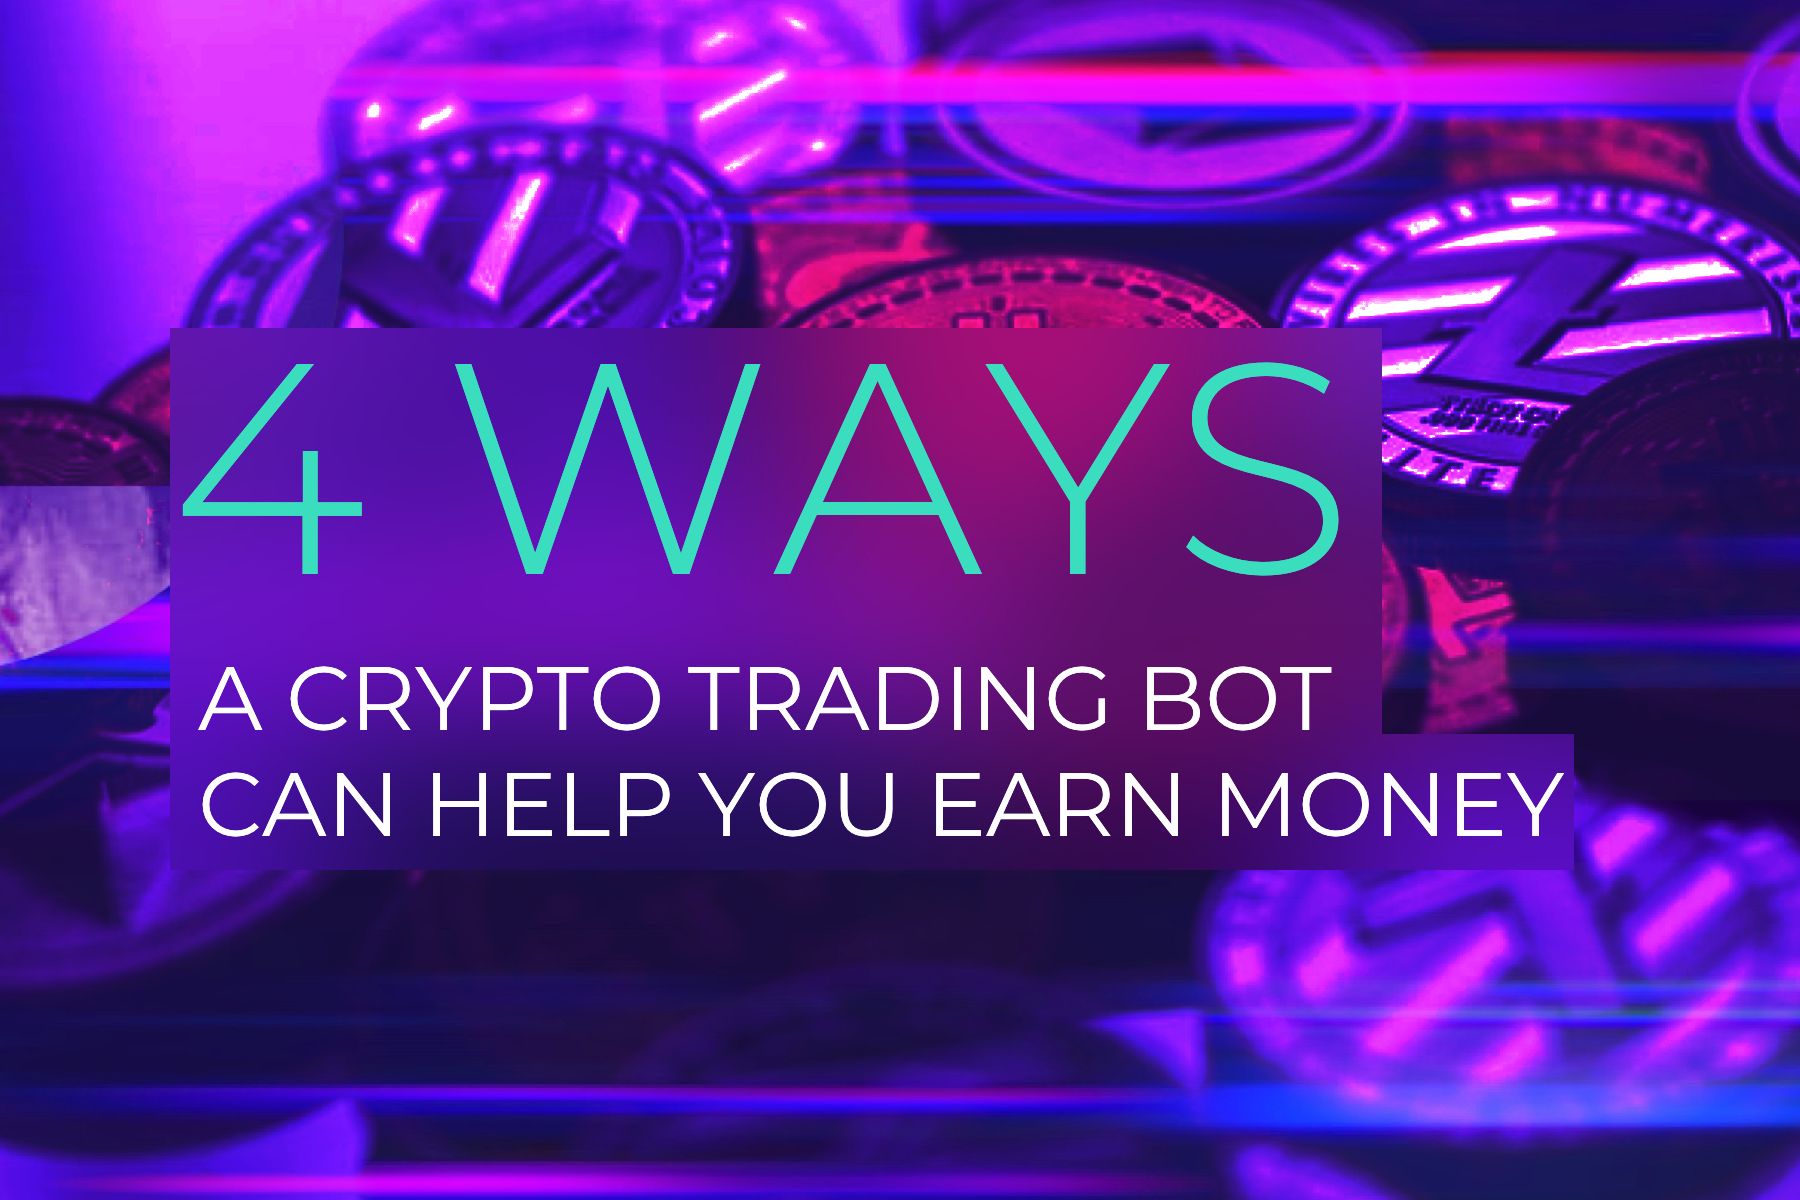 The 4 Ways a Crypto Trading Bot Can Help You Earn Money